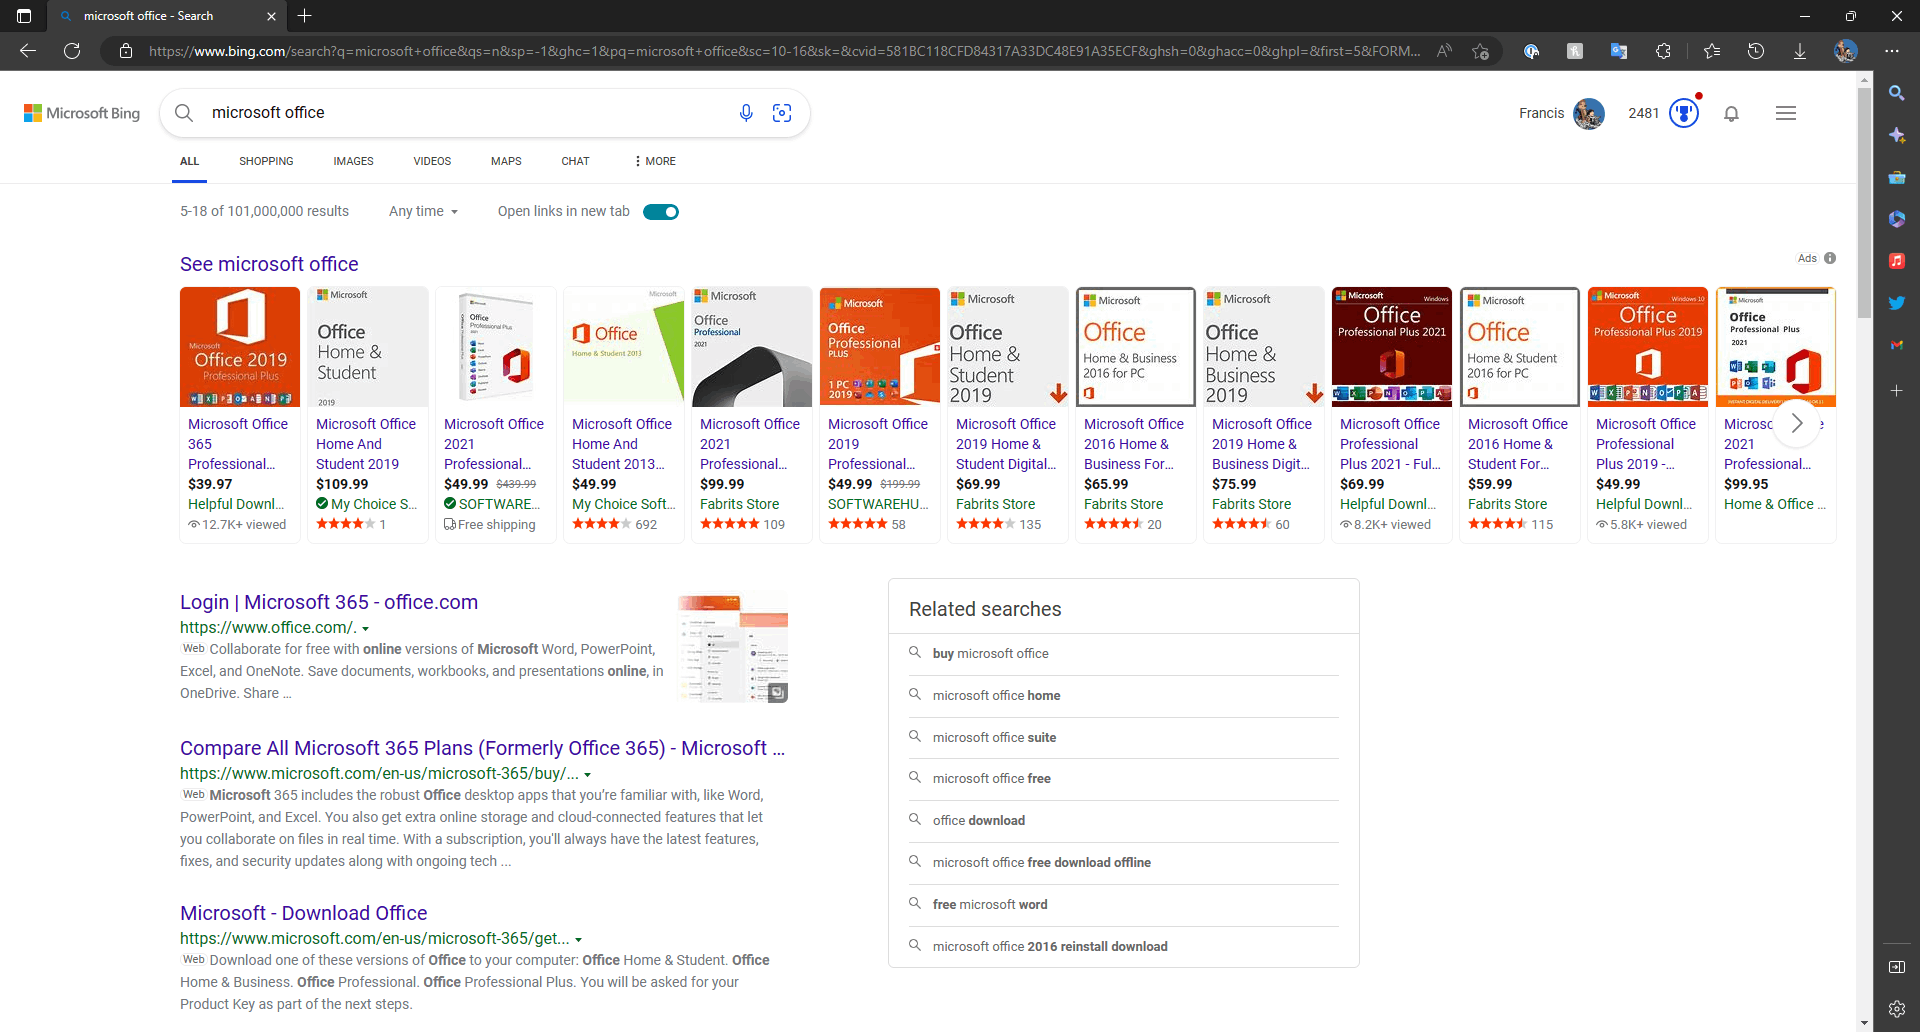 Xbox One Gets Bing Web Search